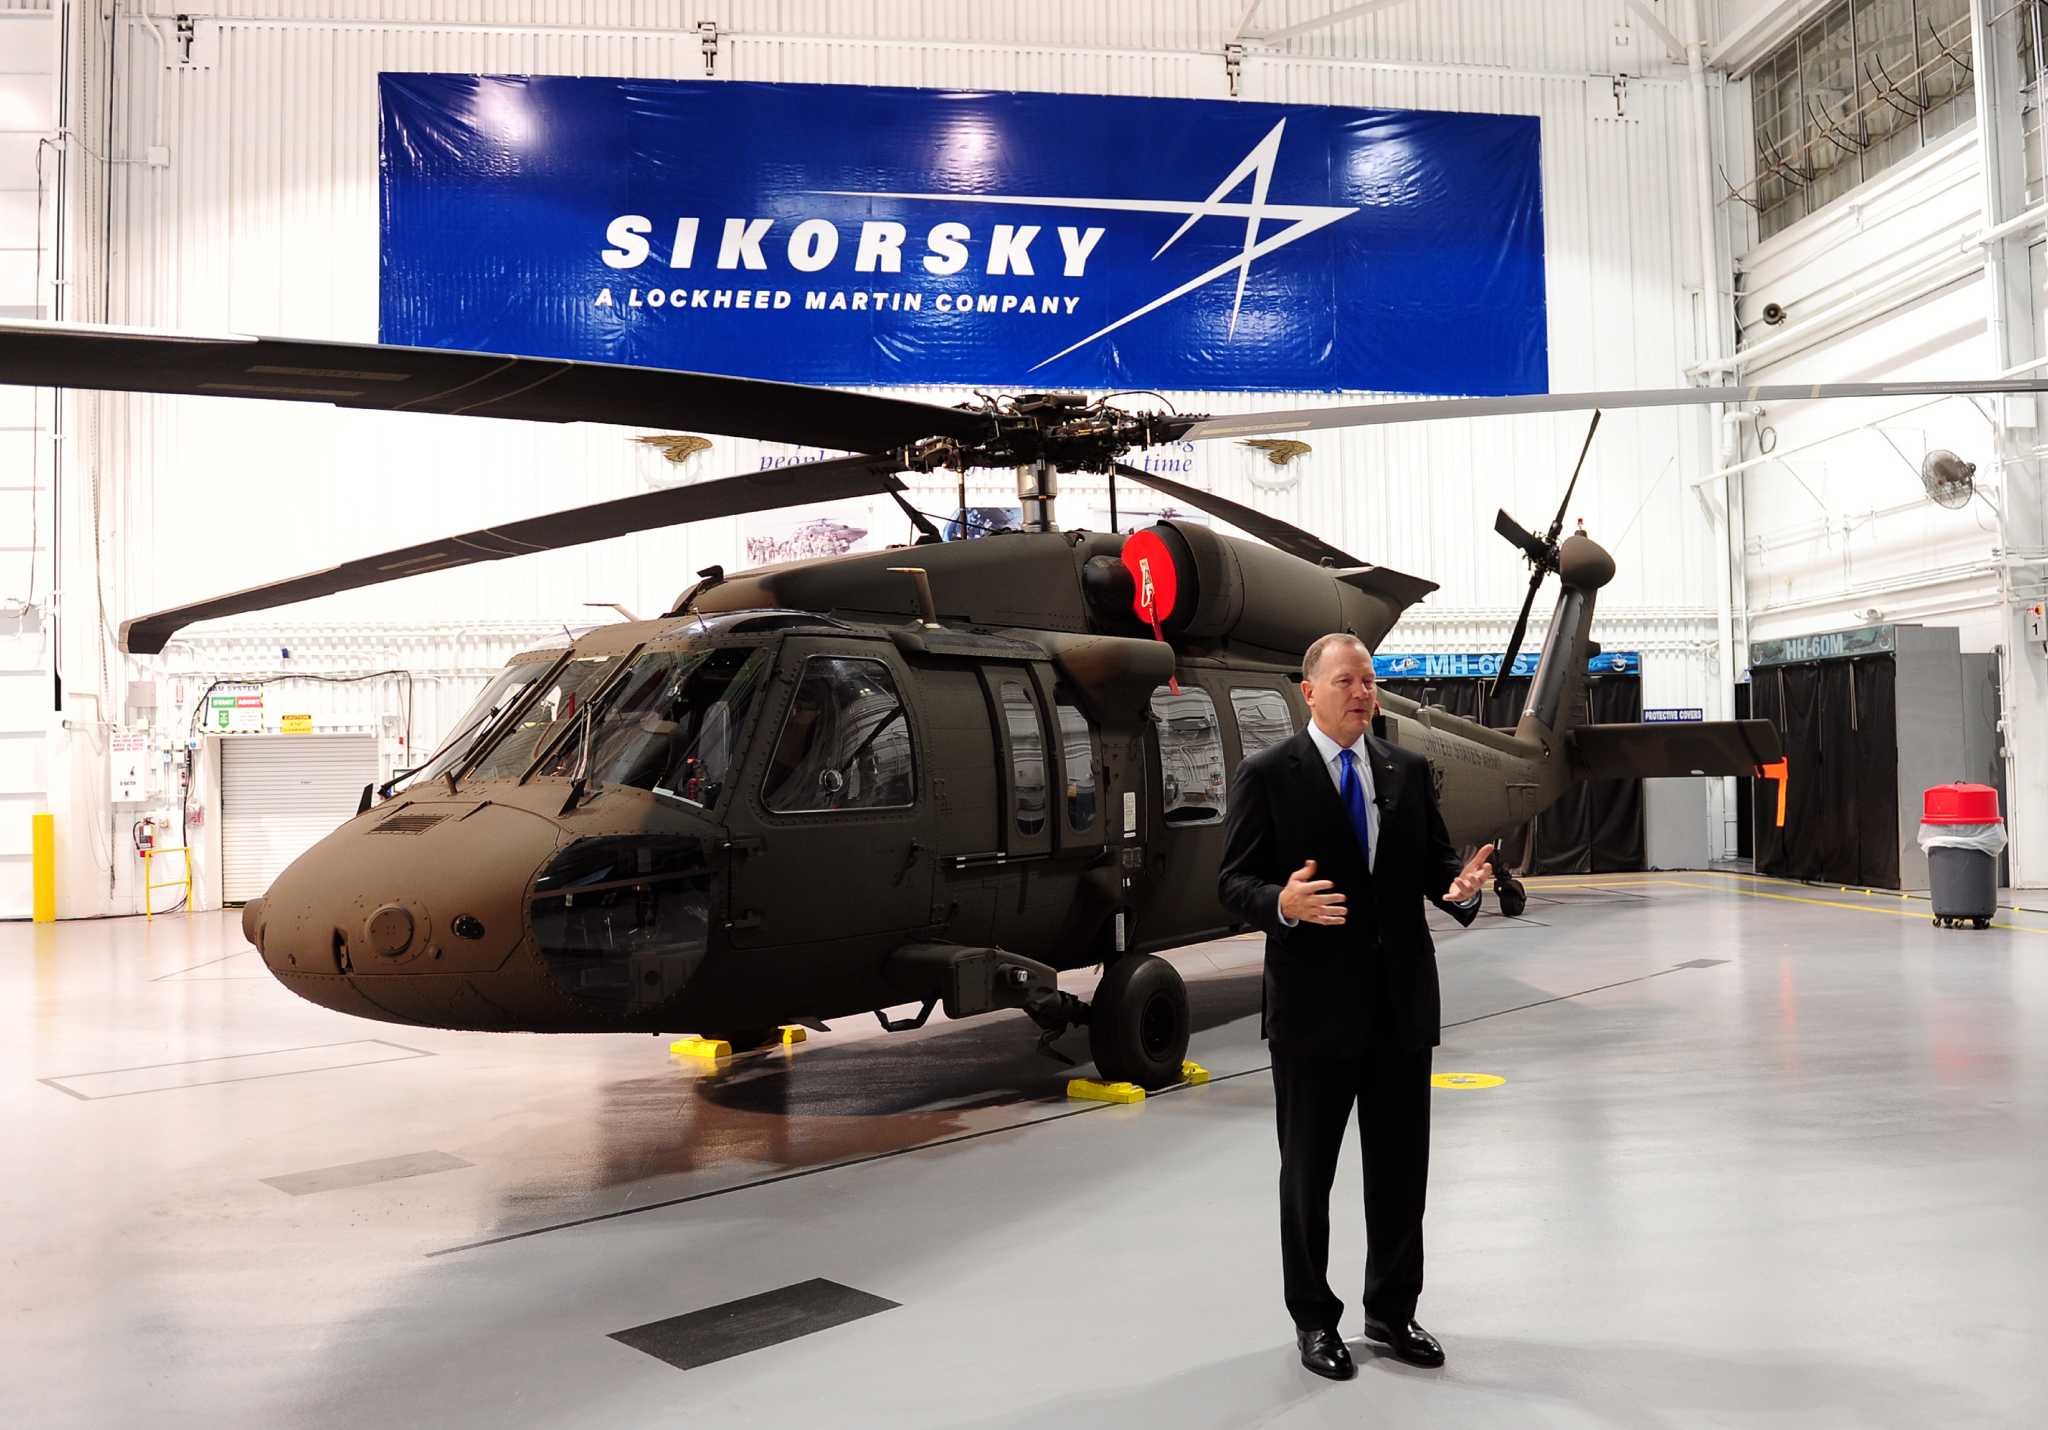 Sikorsky Logo - Lockheed Martin commits to Sikorsky future in Stratford